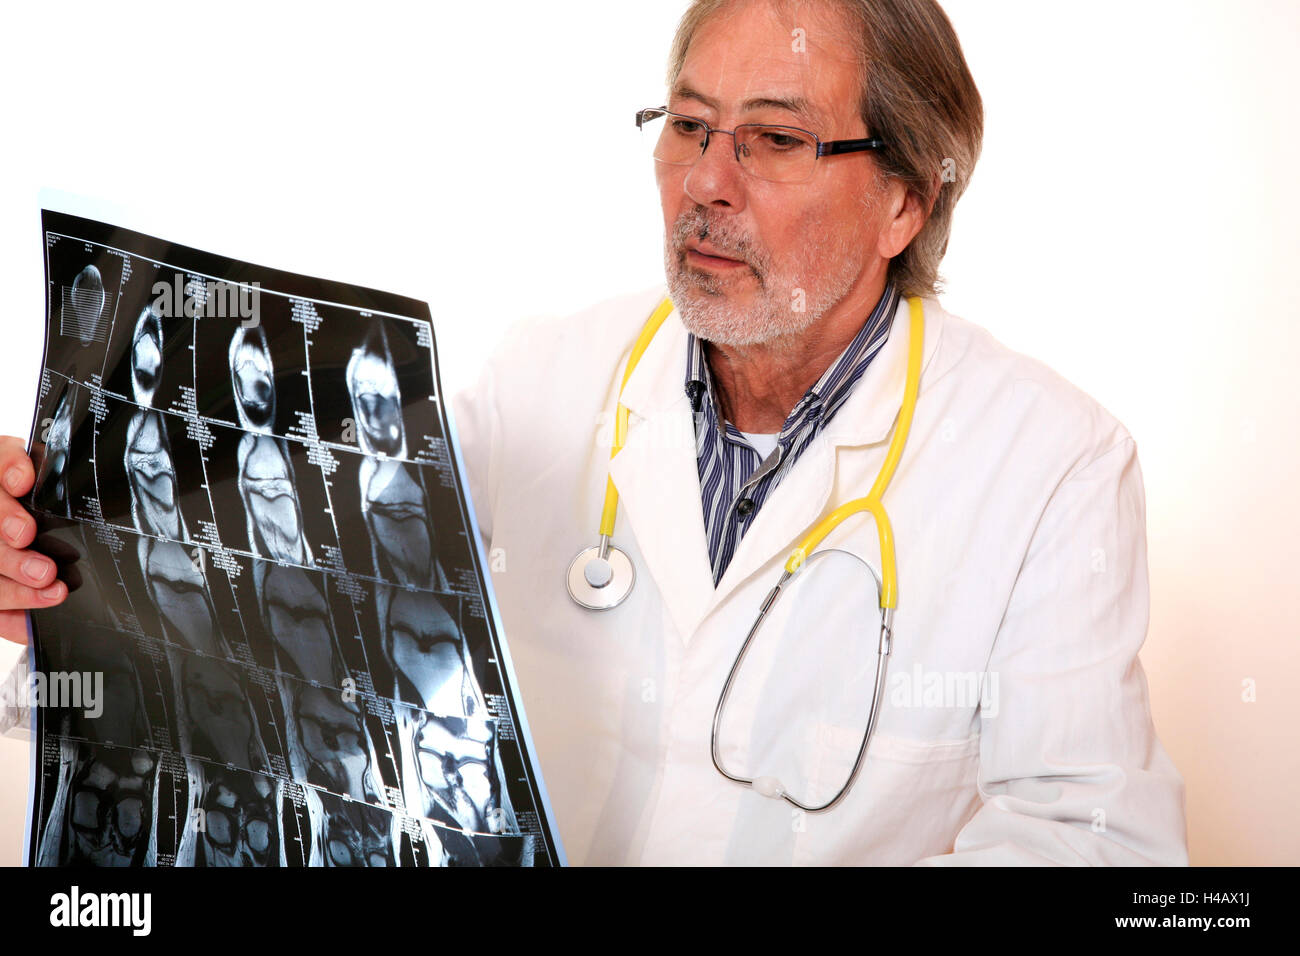 Doctor, X-ray picture, knee, diagnosis Stock Photo